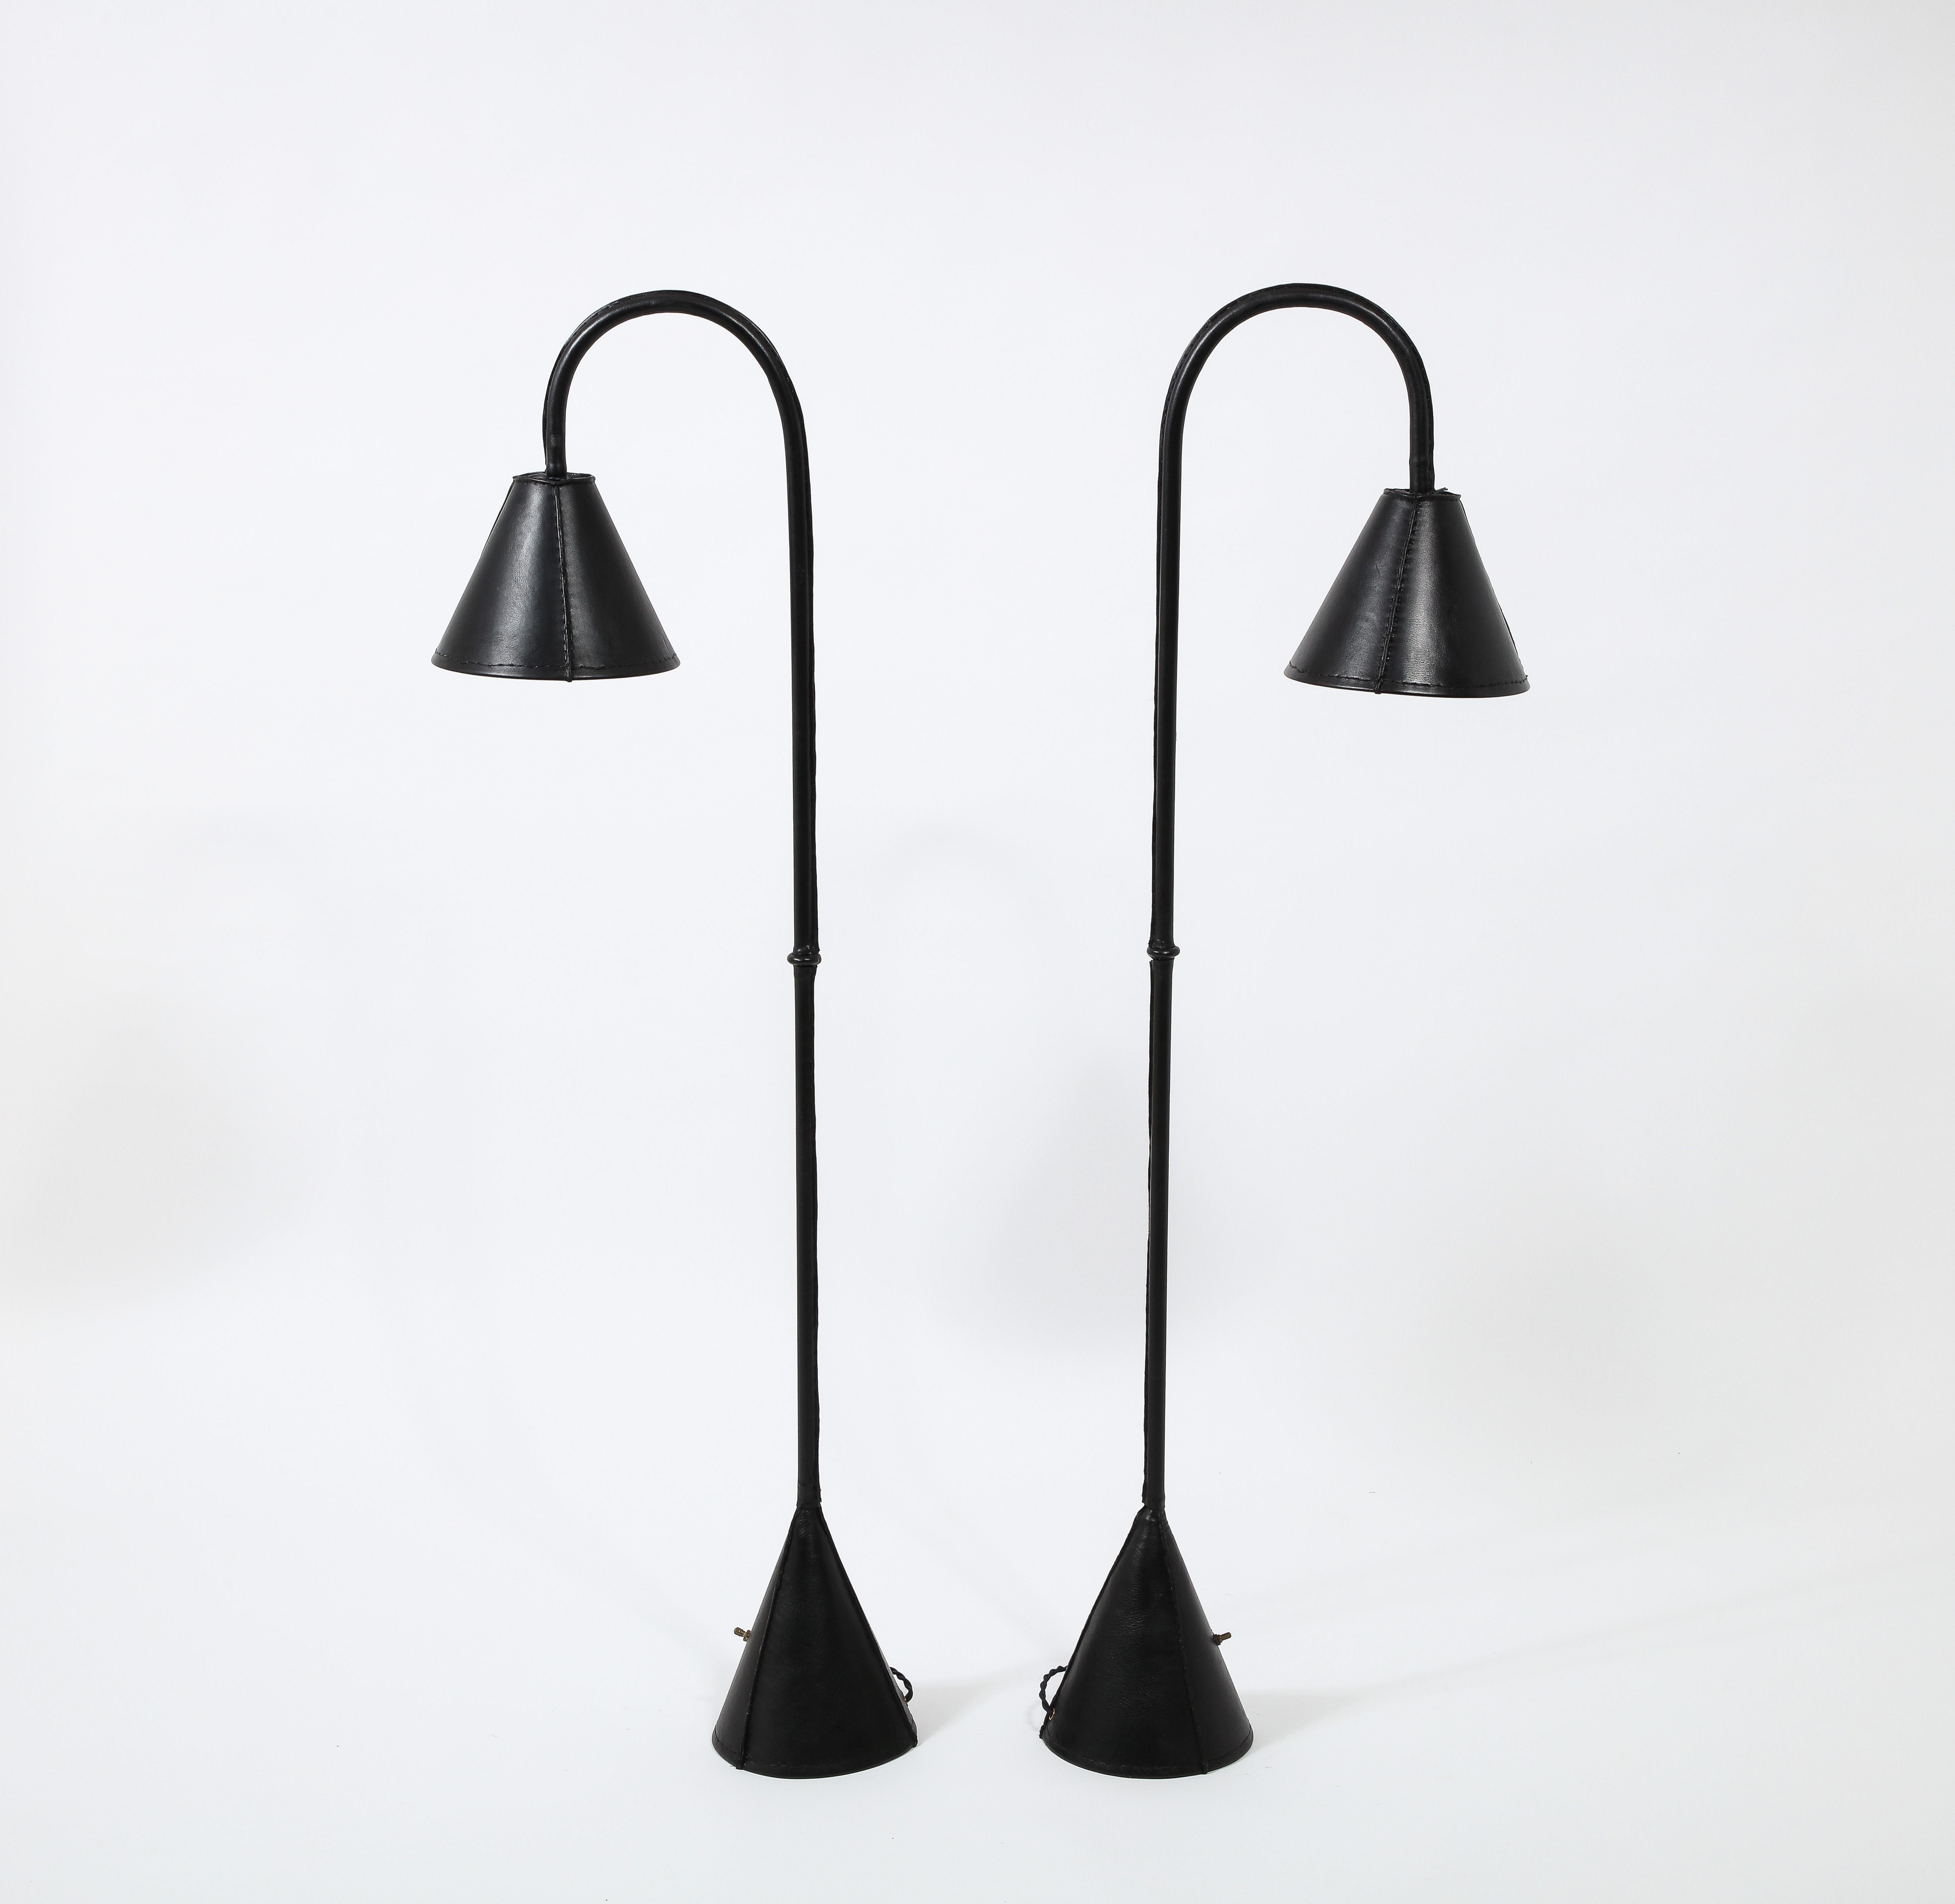 Valenti Reading Lamps in Stitched Leather, France 1960's For Sale 9